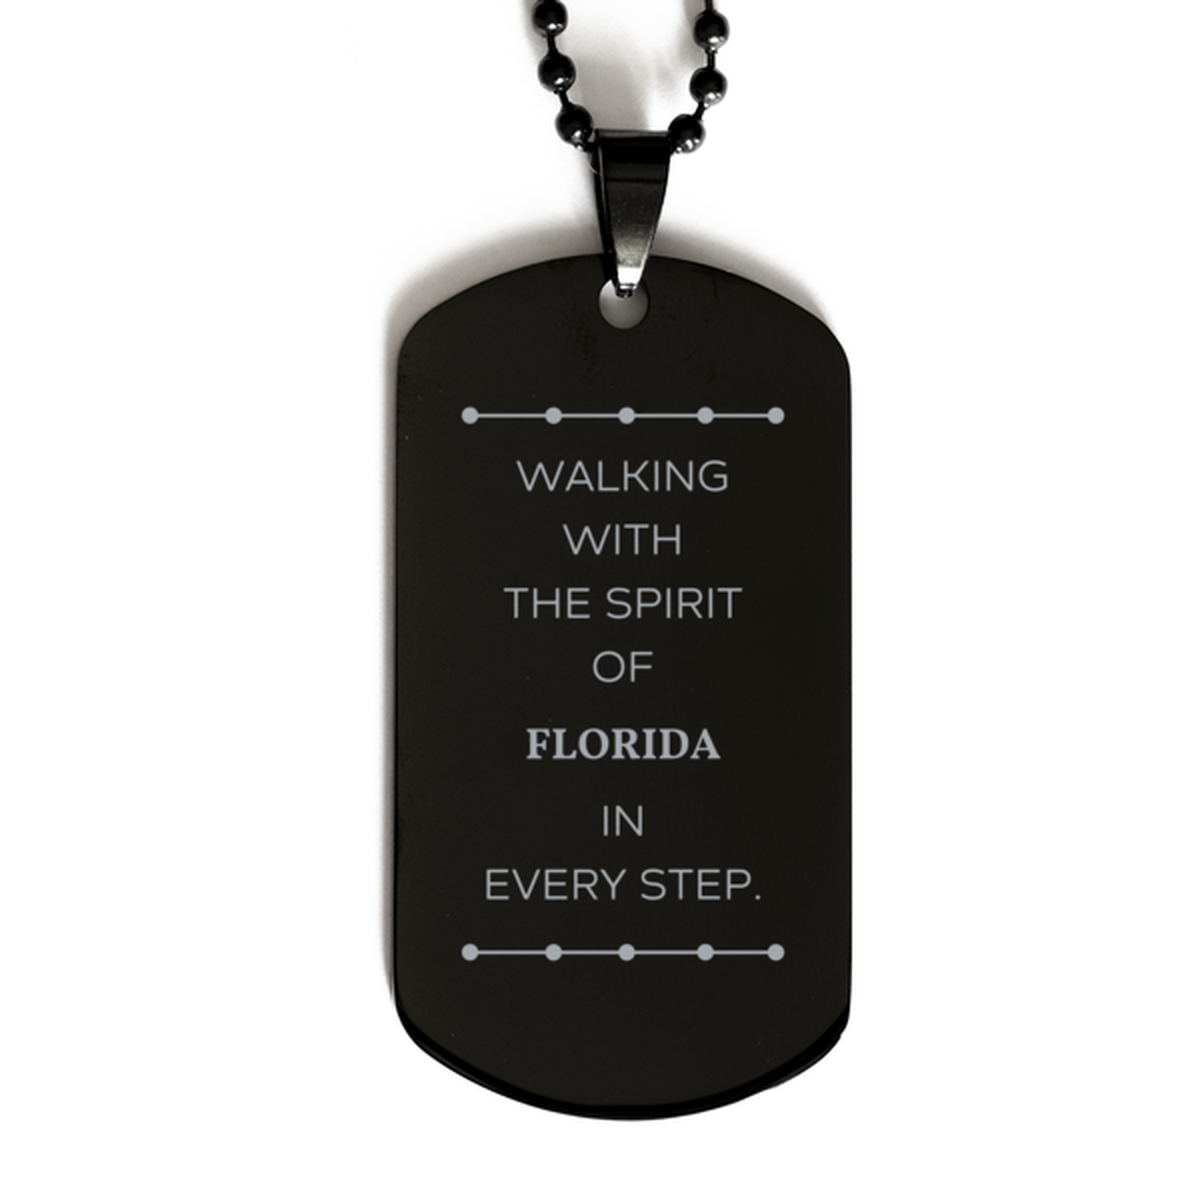 Florida Gifts, Walking with the spirit, Love Florida Birthday Christmas Black Dog Tag For Florida People, Men, Women, Friends